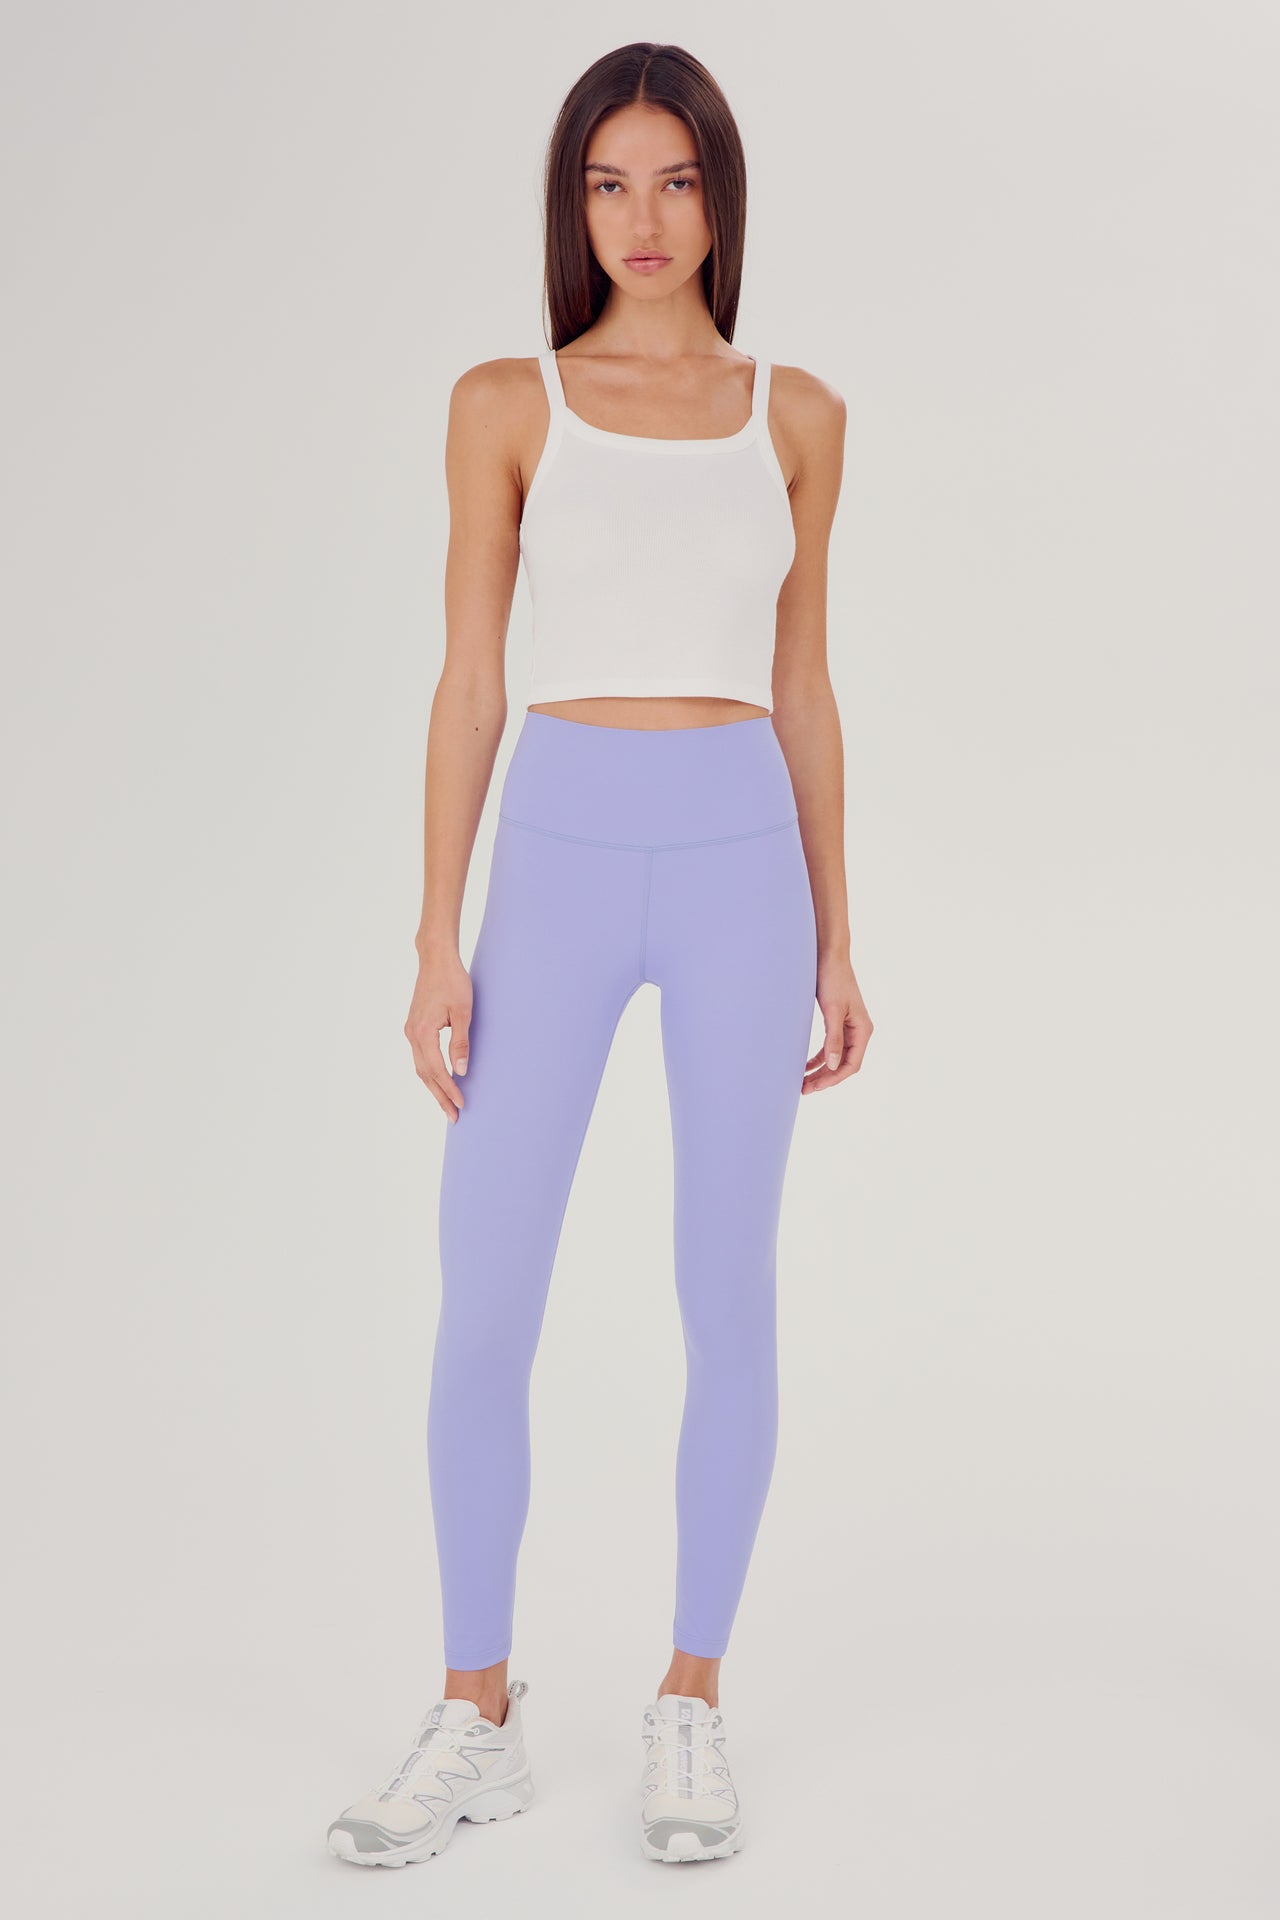 Front full view of woman with dark straight hair wearing light purple high waist  leggings with white cropped tank and white shoes